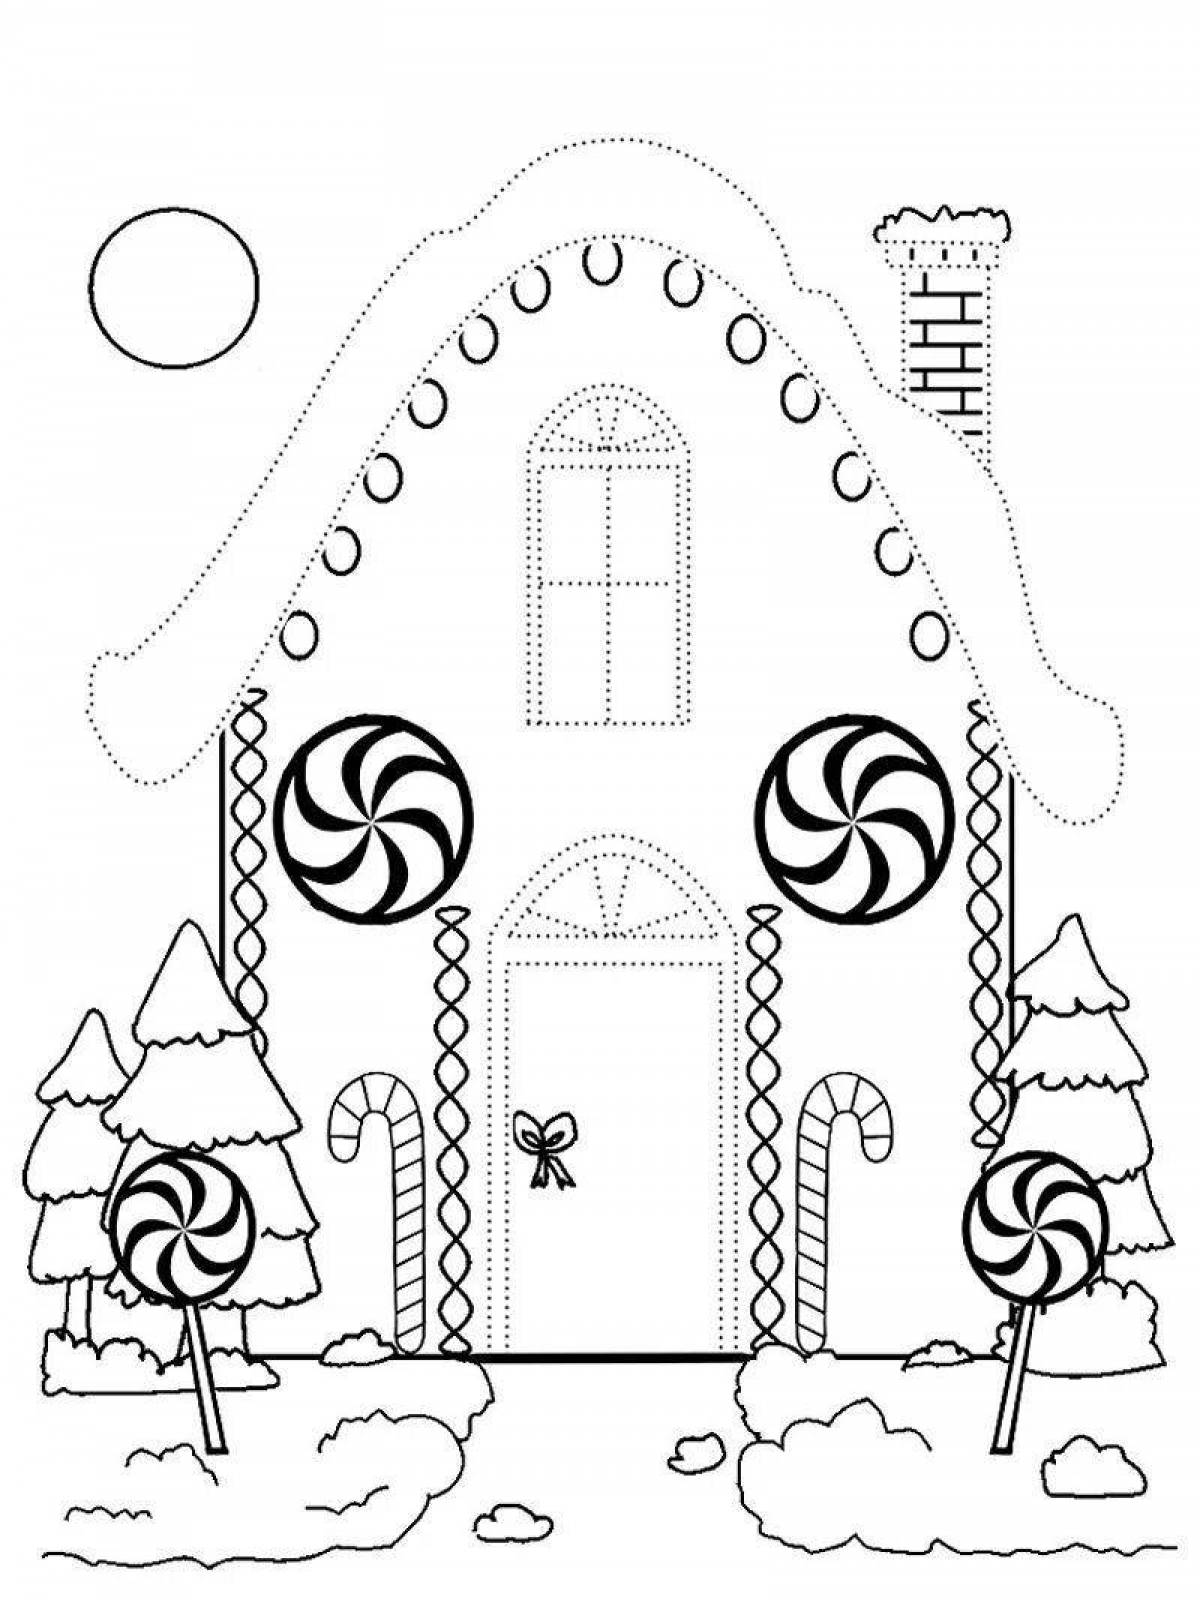 Coloring book playful cute house